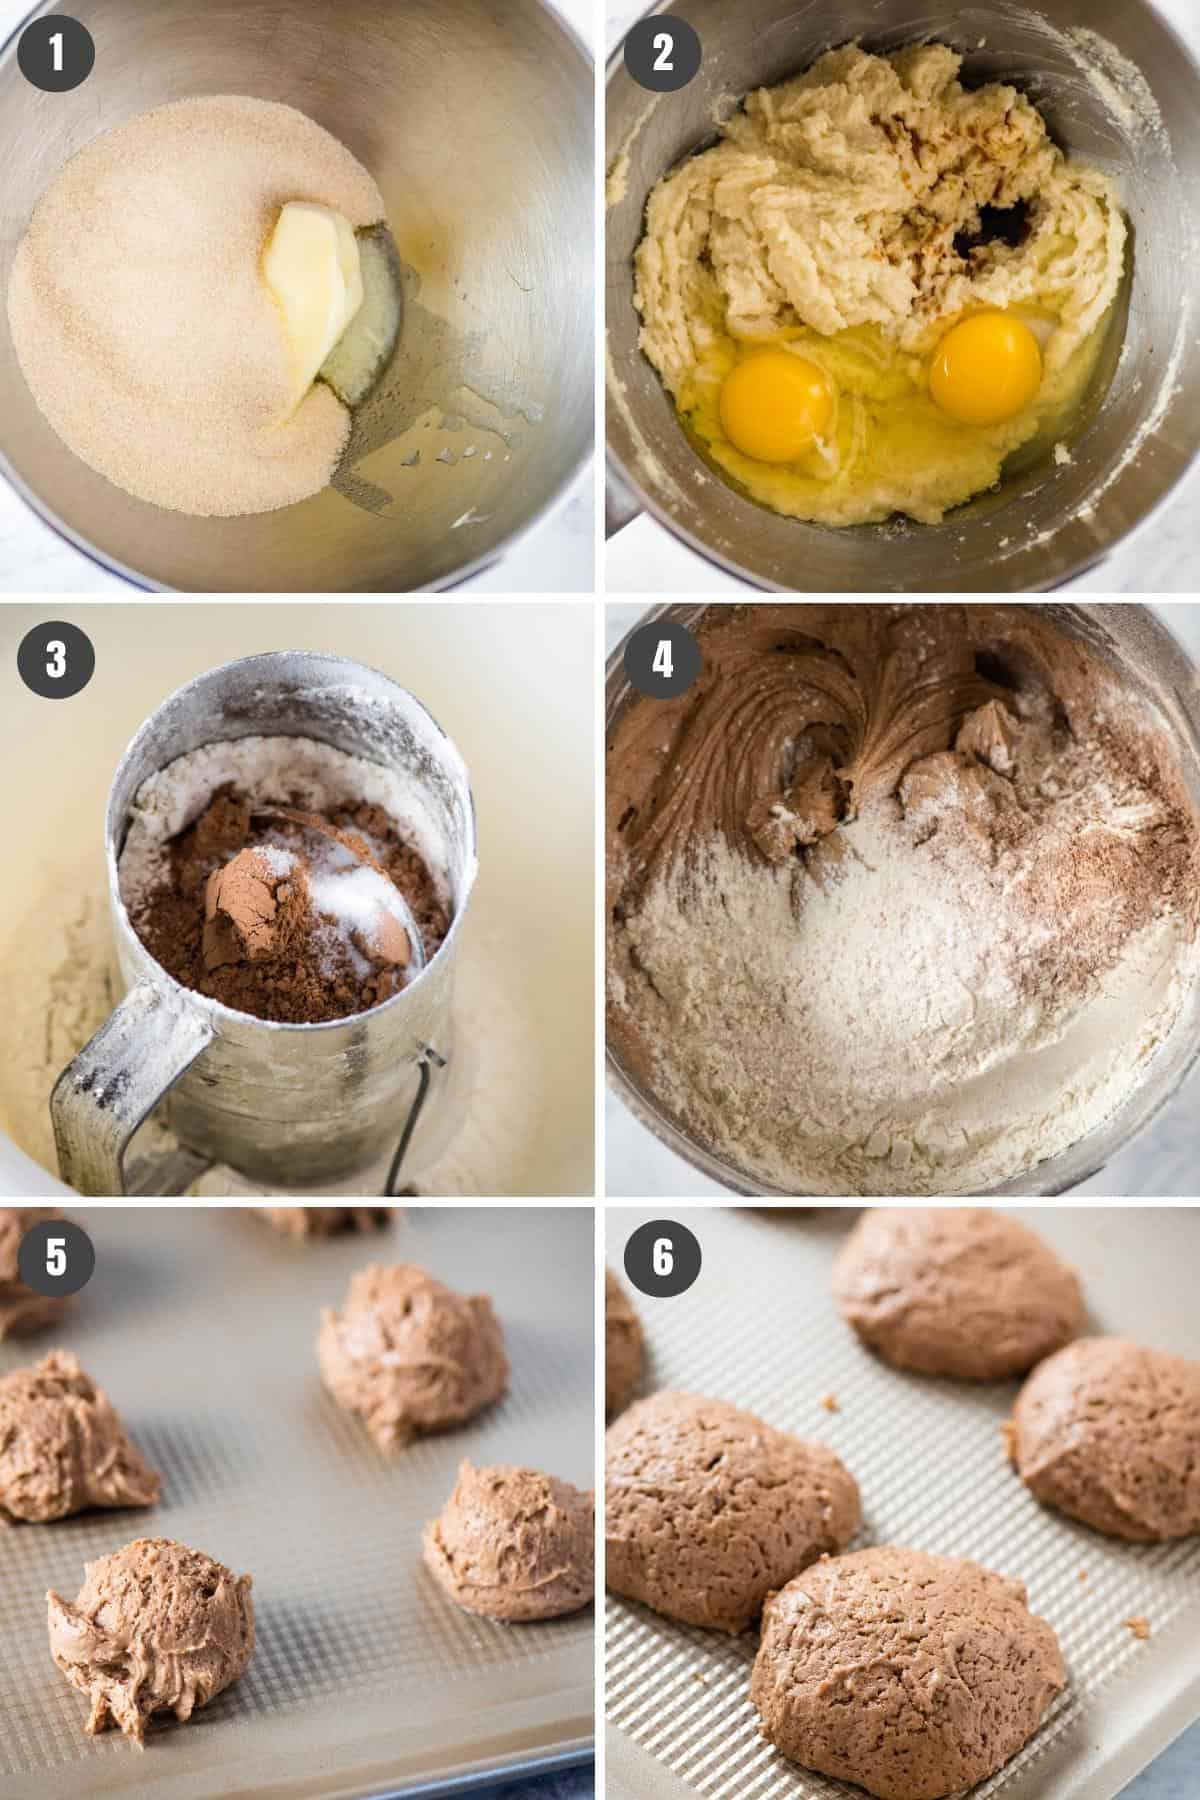 steps for how to make chocolate whoopie pie recipe in KitchenAid bowl, mixing butter and sugar, eggs and vanilla, dry ingredients and milk, scooping cookies, and baking on cookie sheet